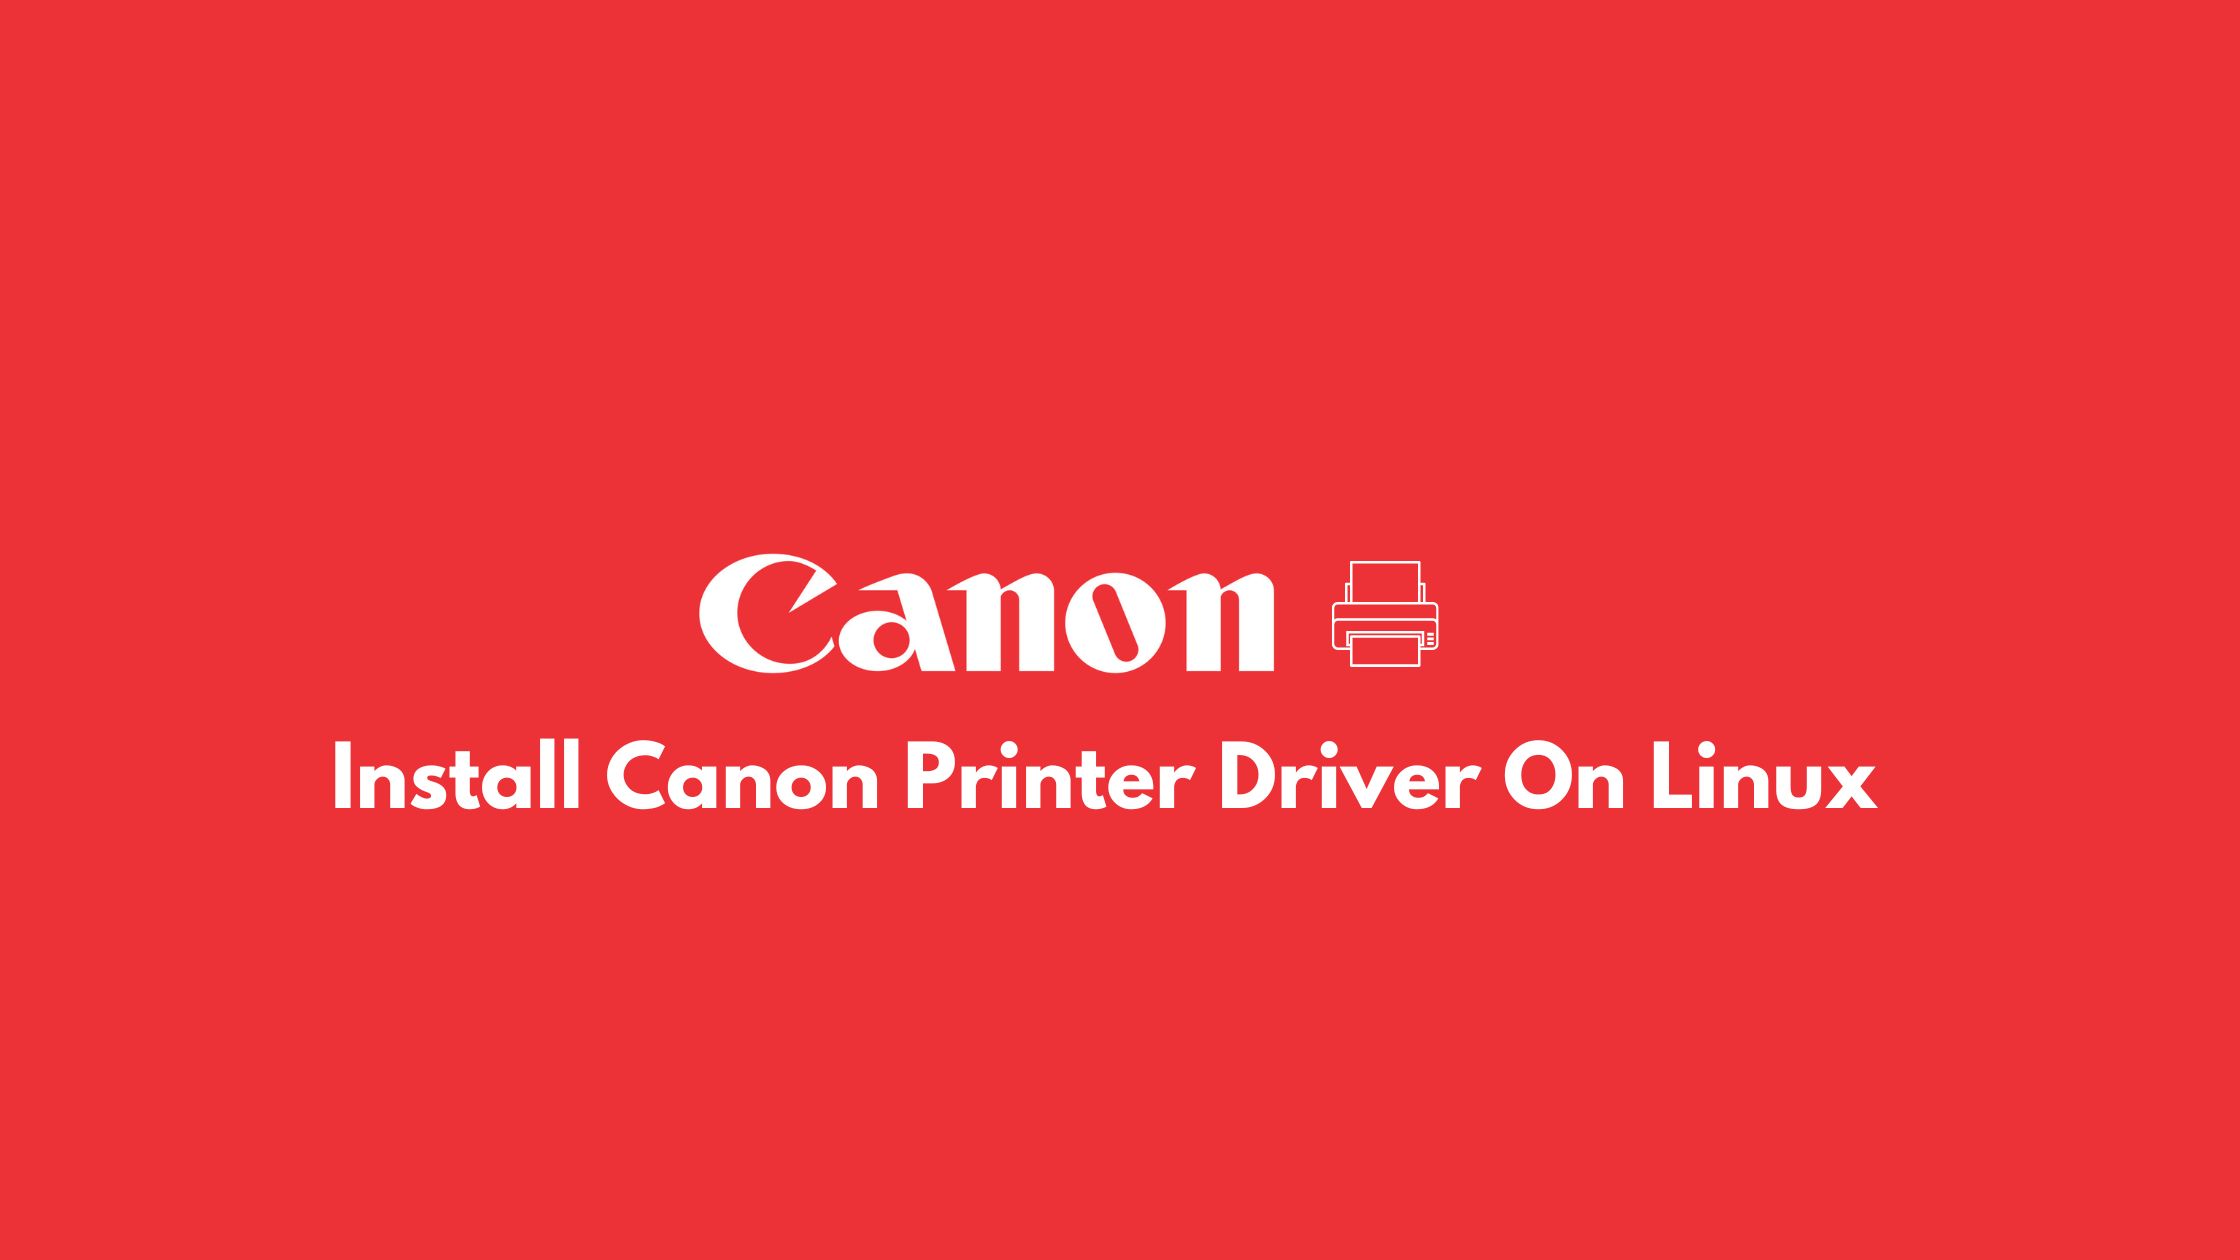 How To Install Canon Printer Driver On Linux